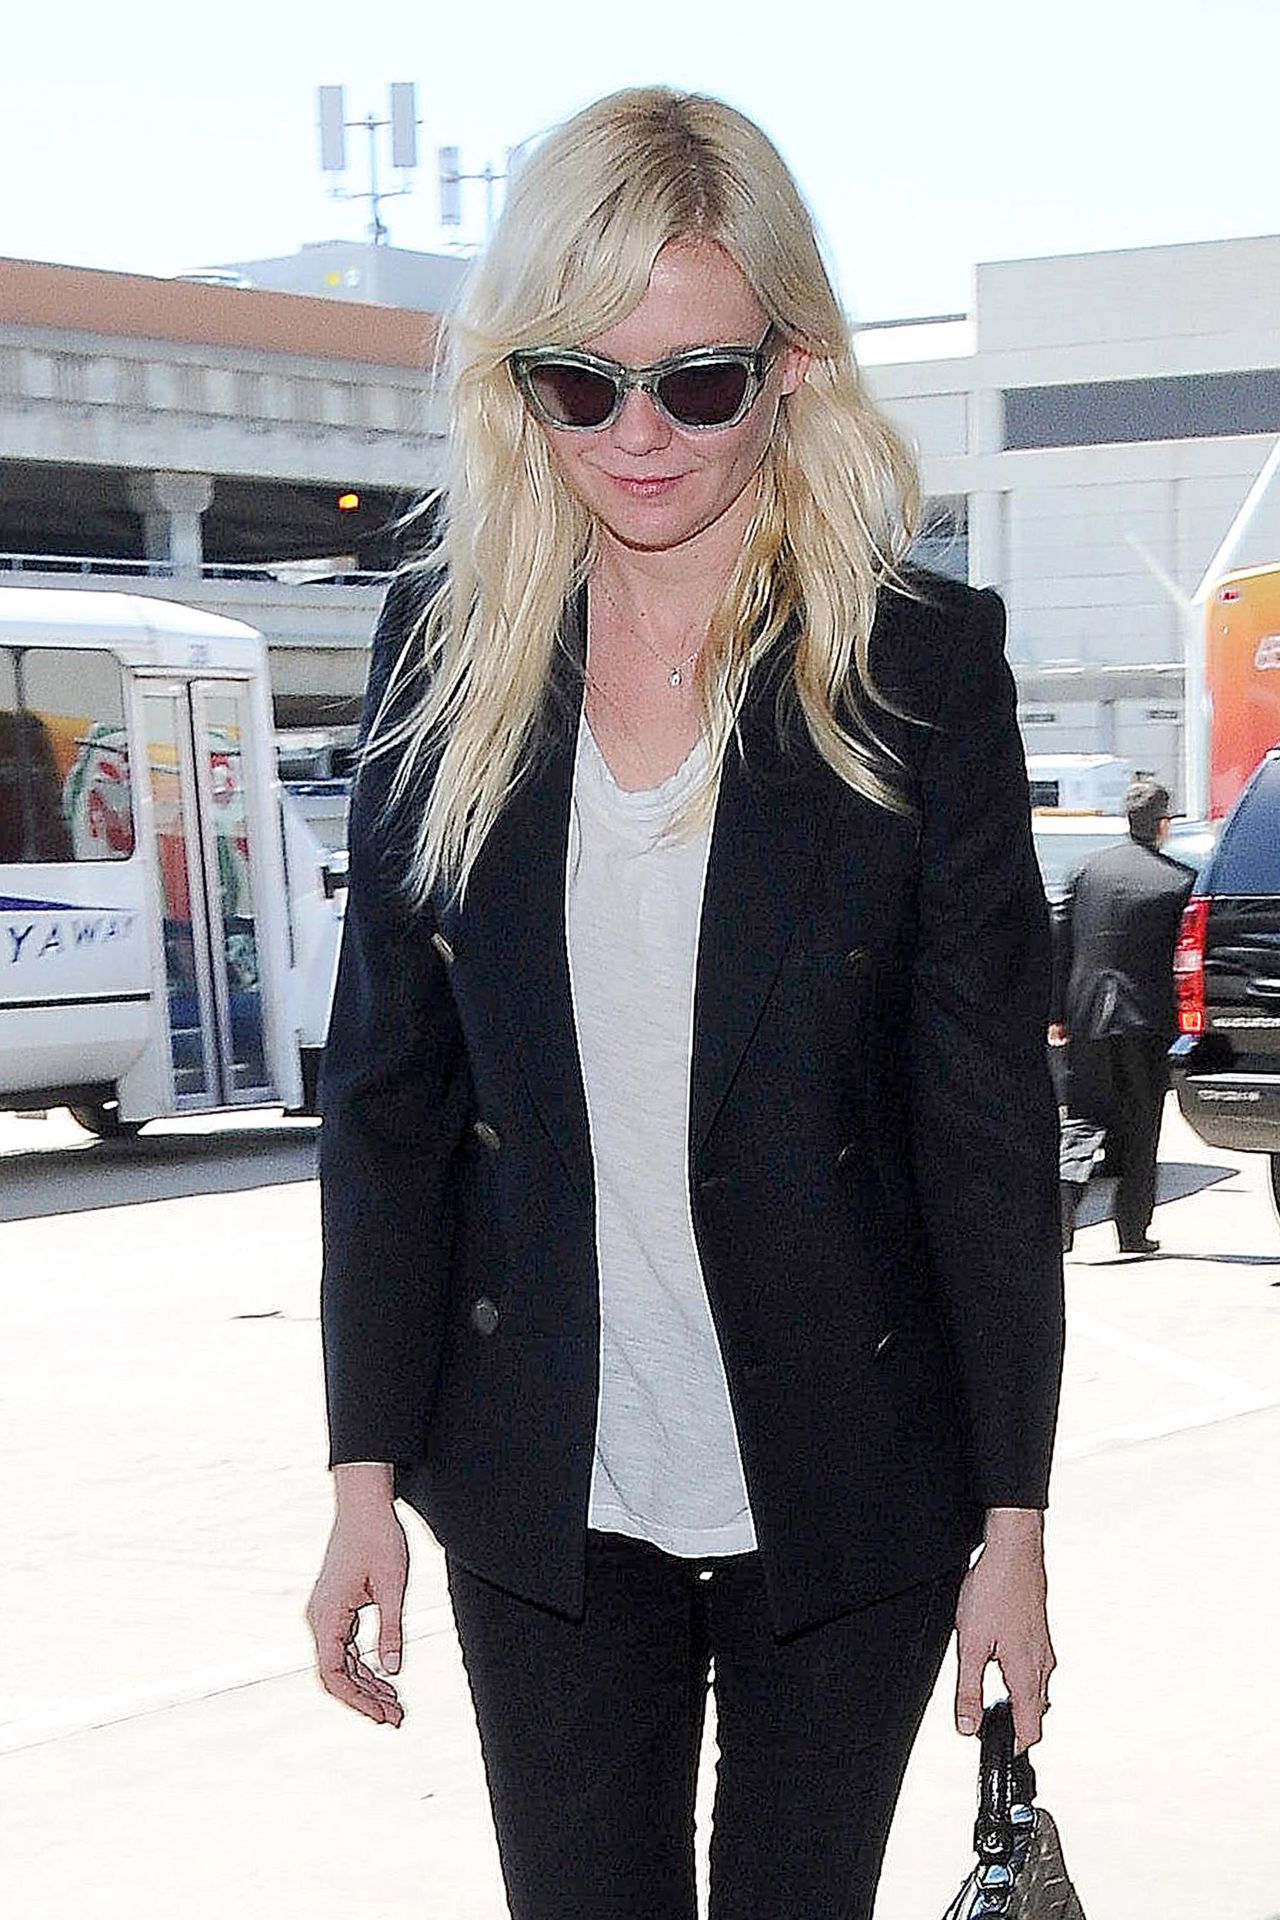 Kirsten Dunst Arriving at LAX Airport to Catch a Flight in Los Angeles ...